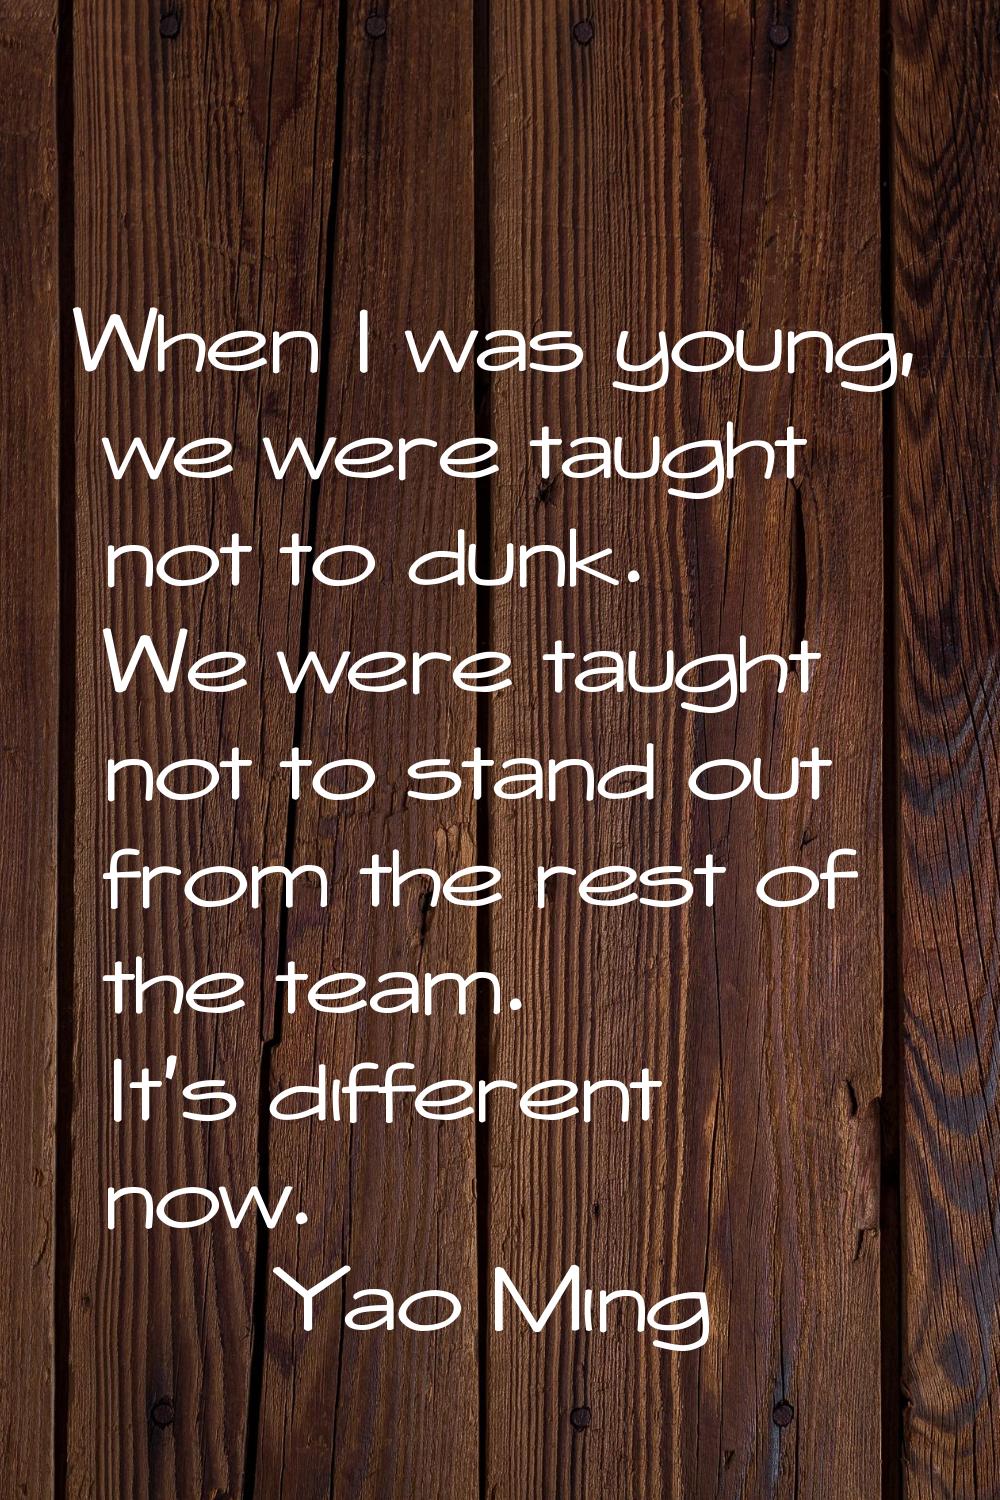 When I was young, we were taught not to dunk. We were taught not to stand out from the rest of the 